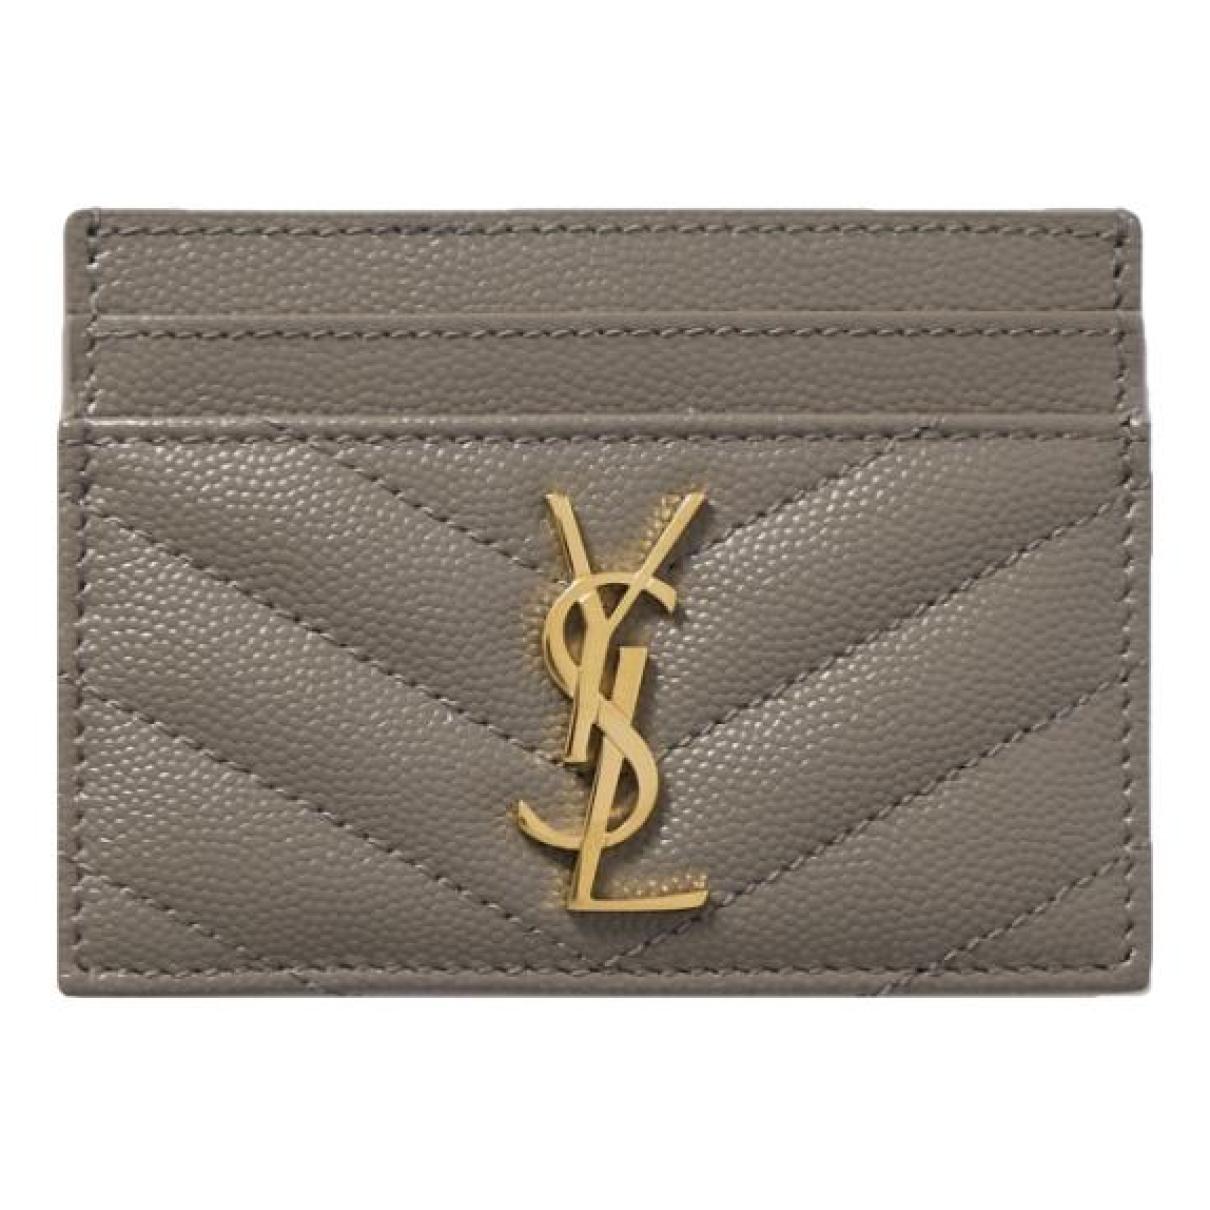 Monogramme leather wallet - 1